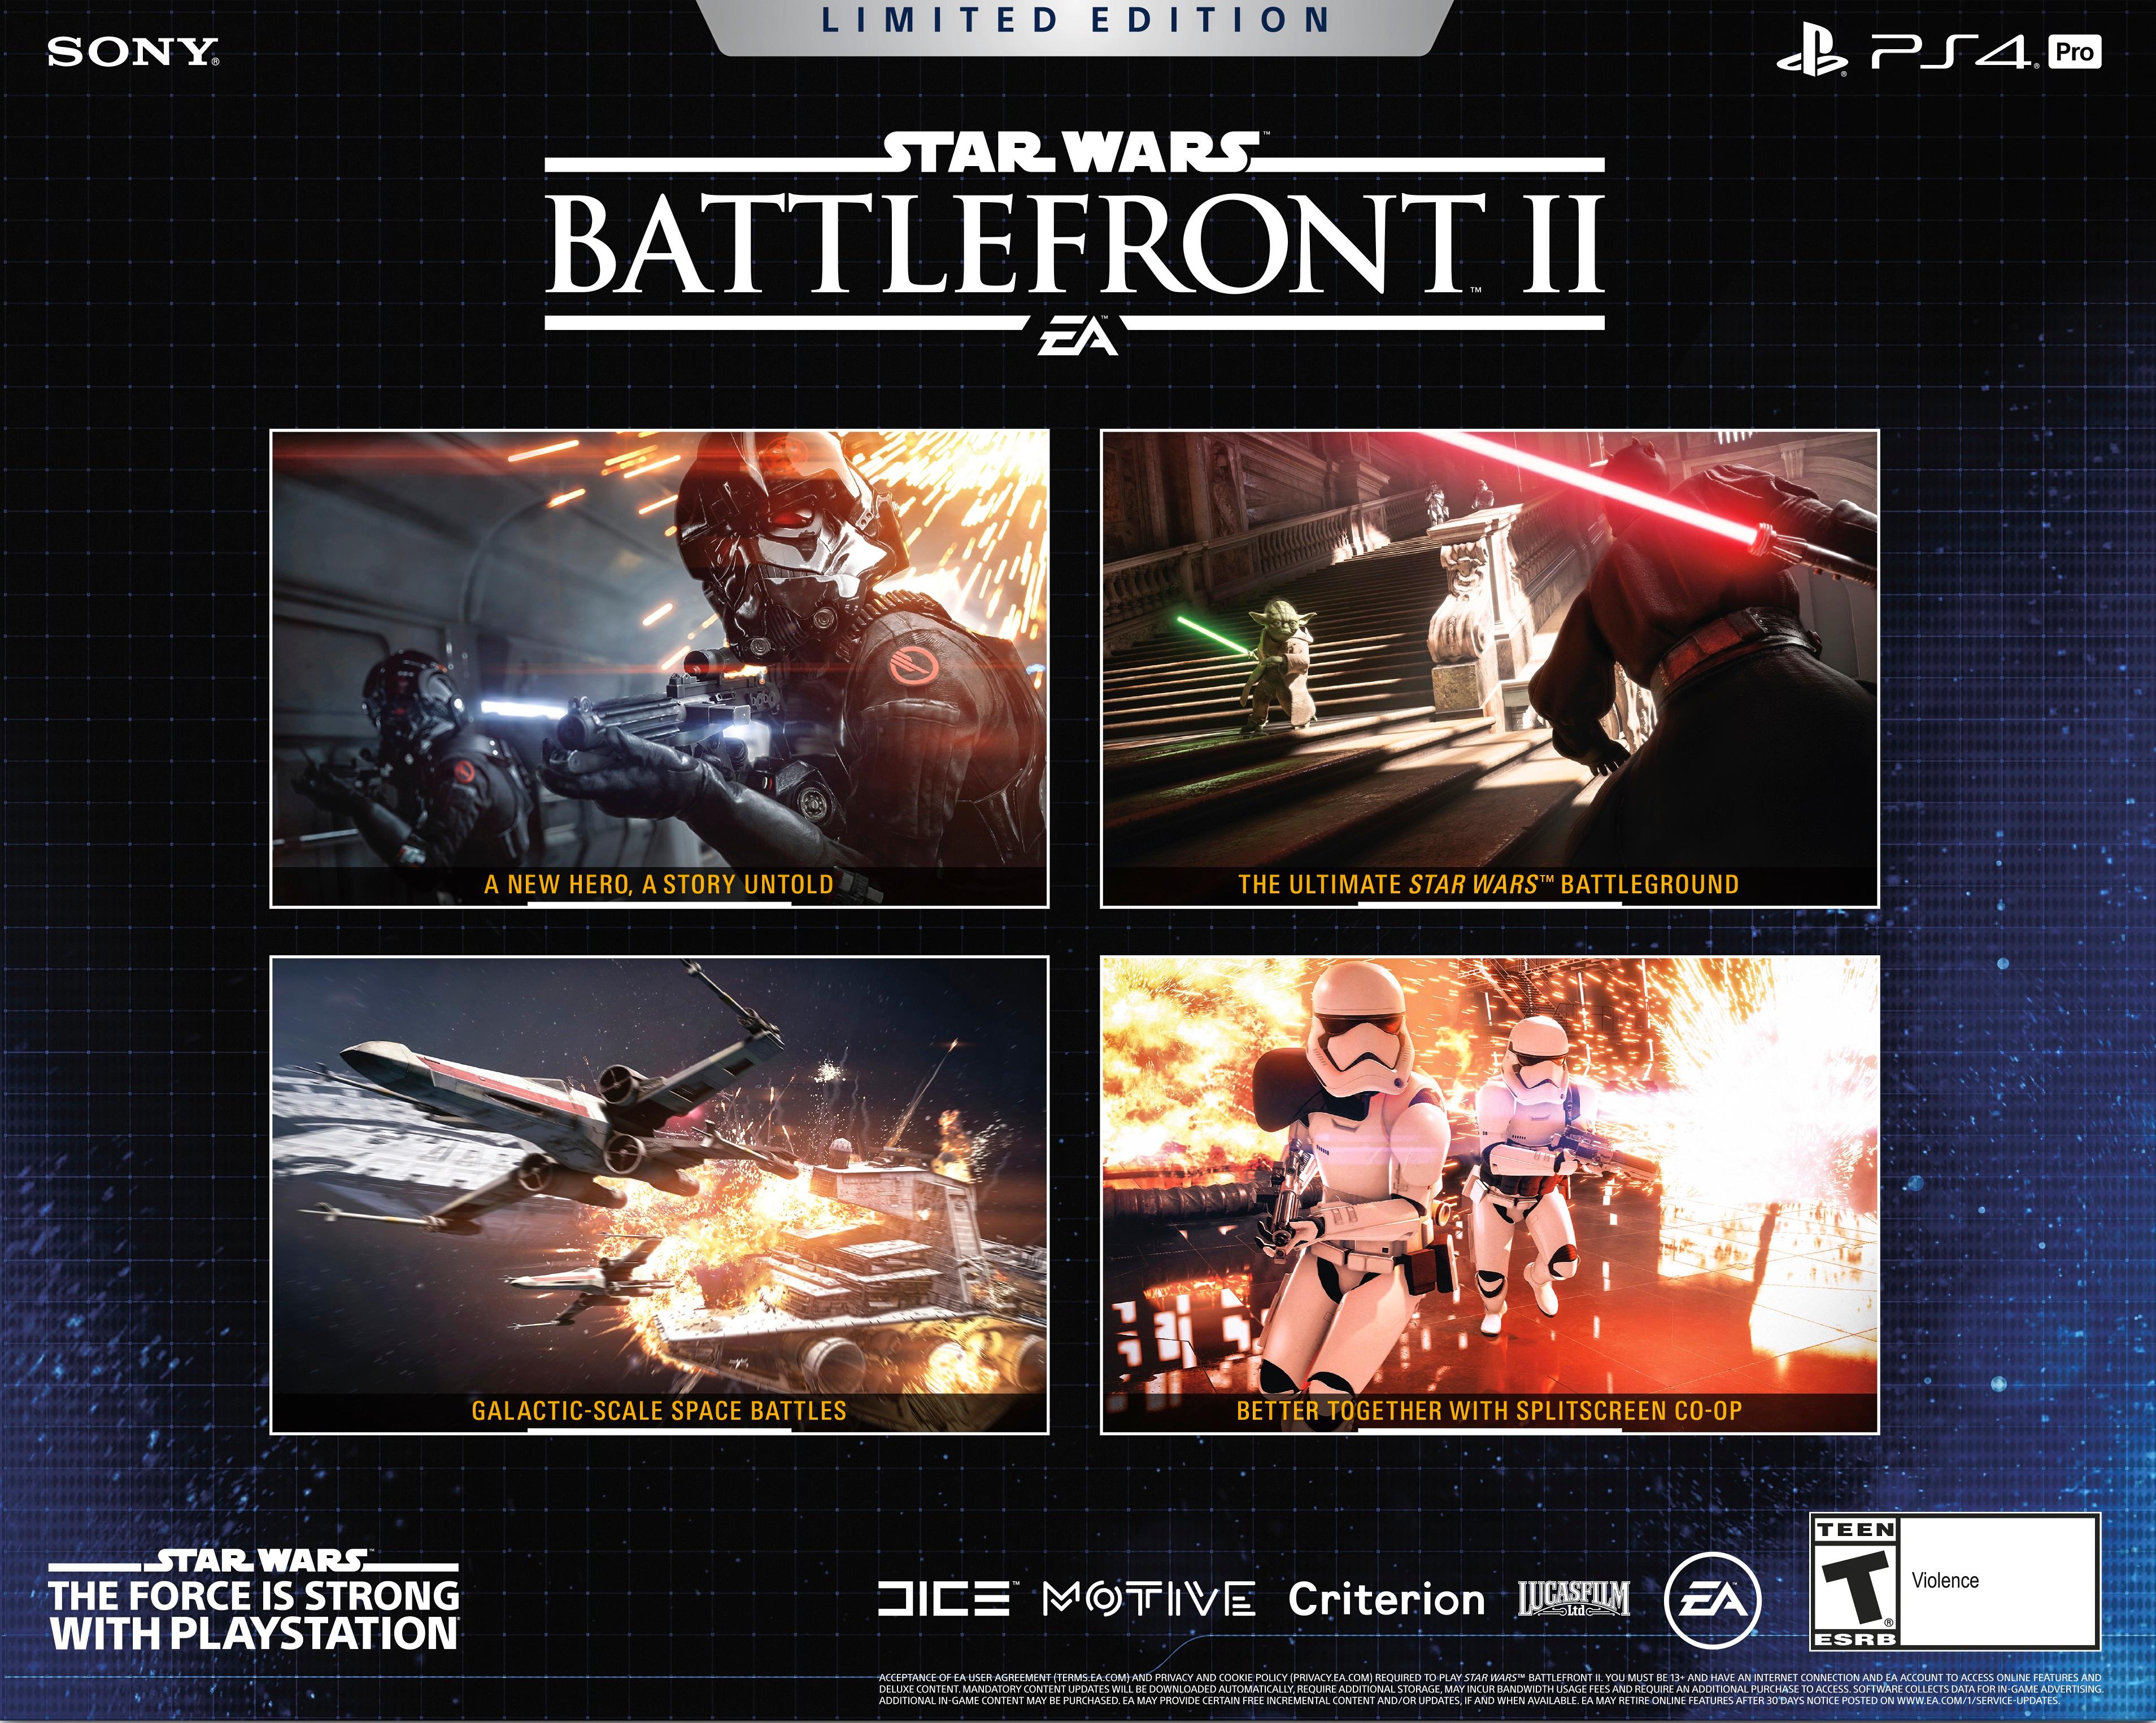 star wars battlefront 2 limited edition ps4